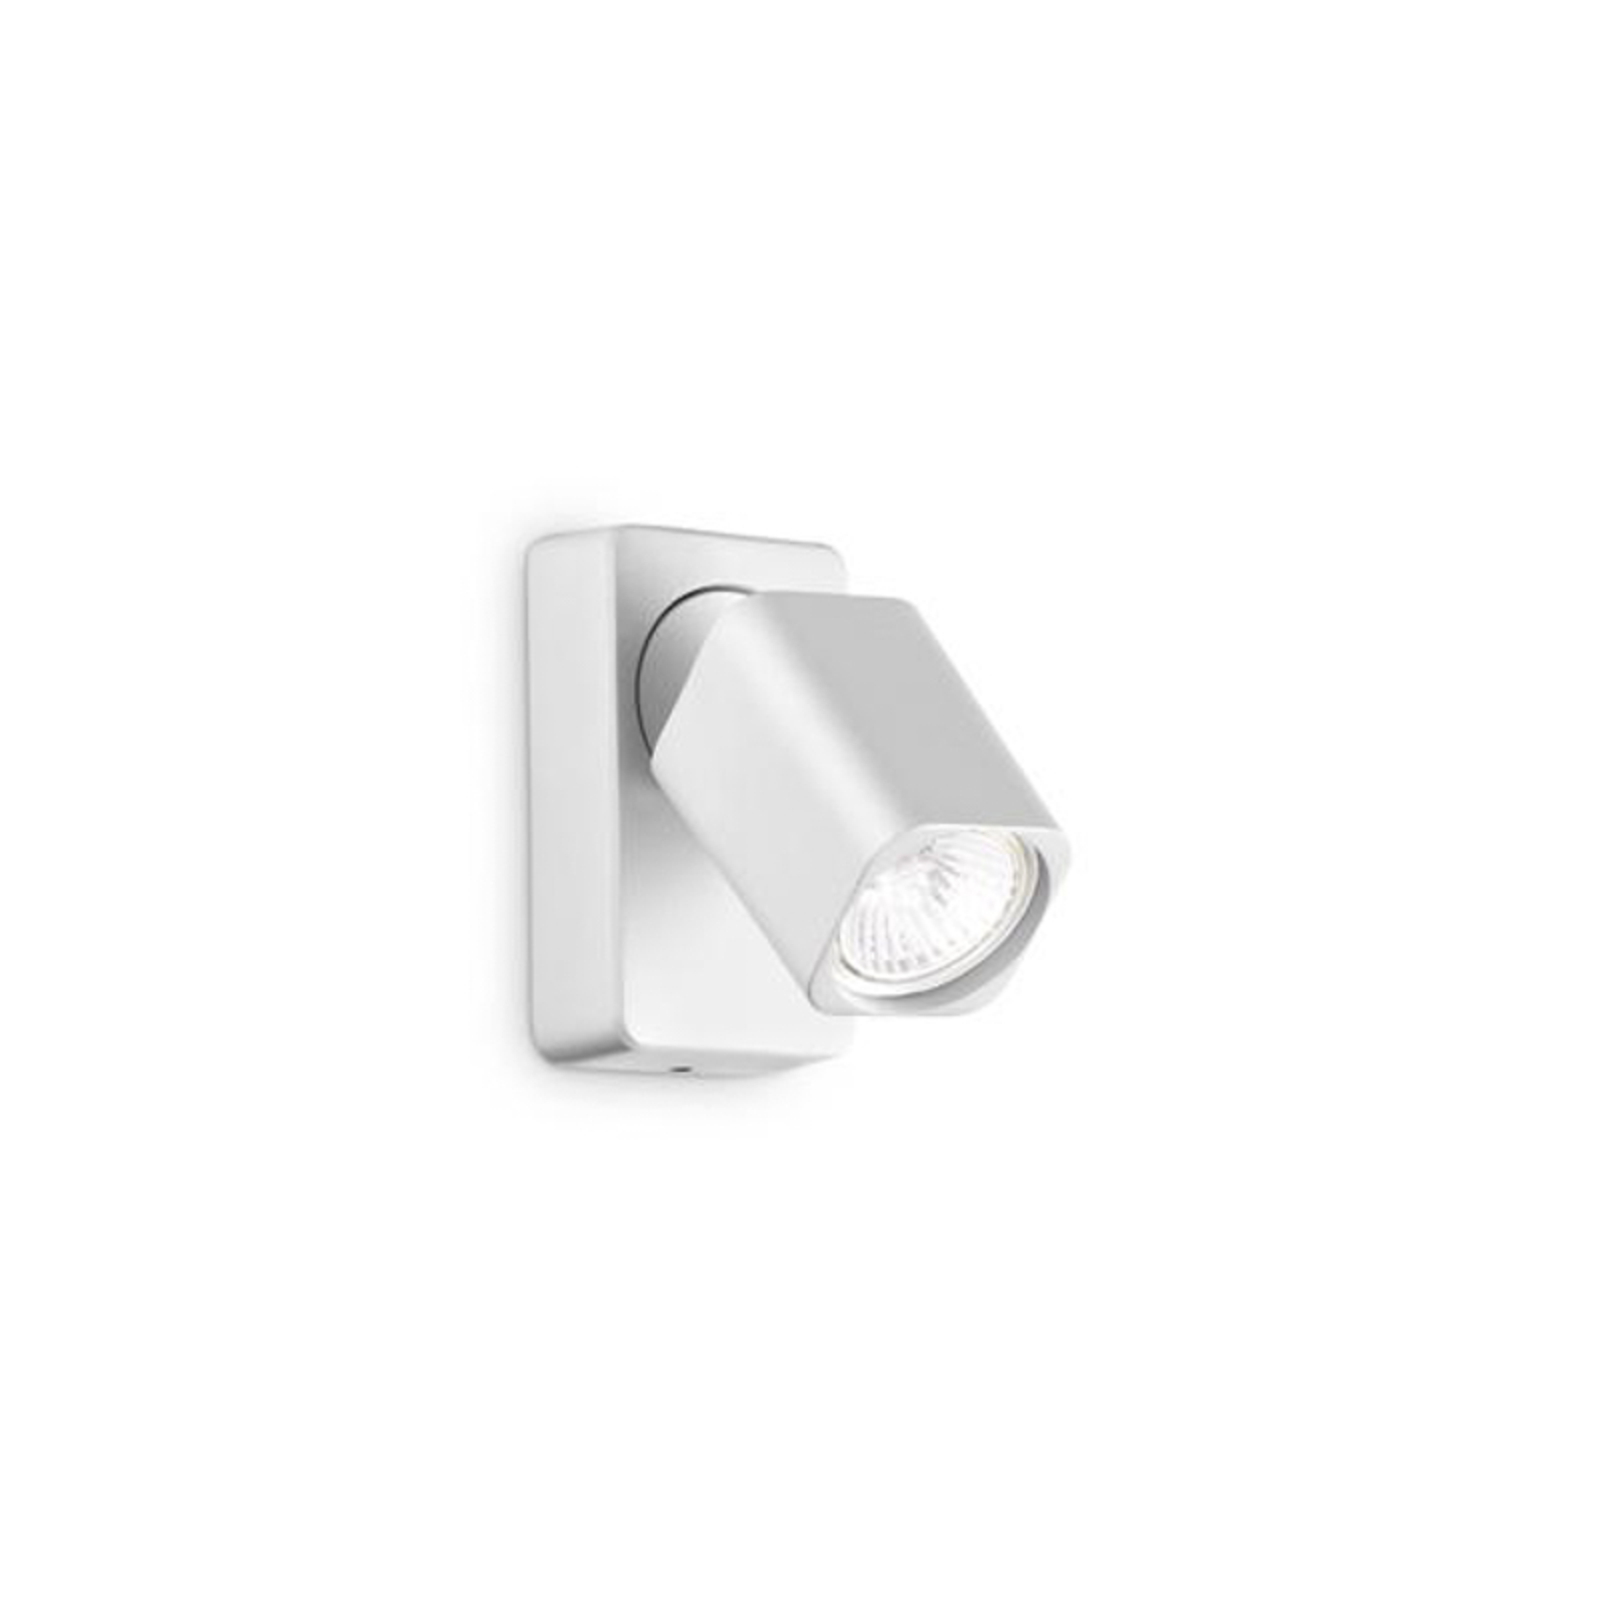 Ideal Lux Wandspot Rudy Square, weiß, einflammig, Metall